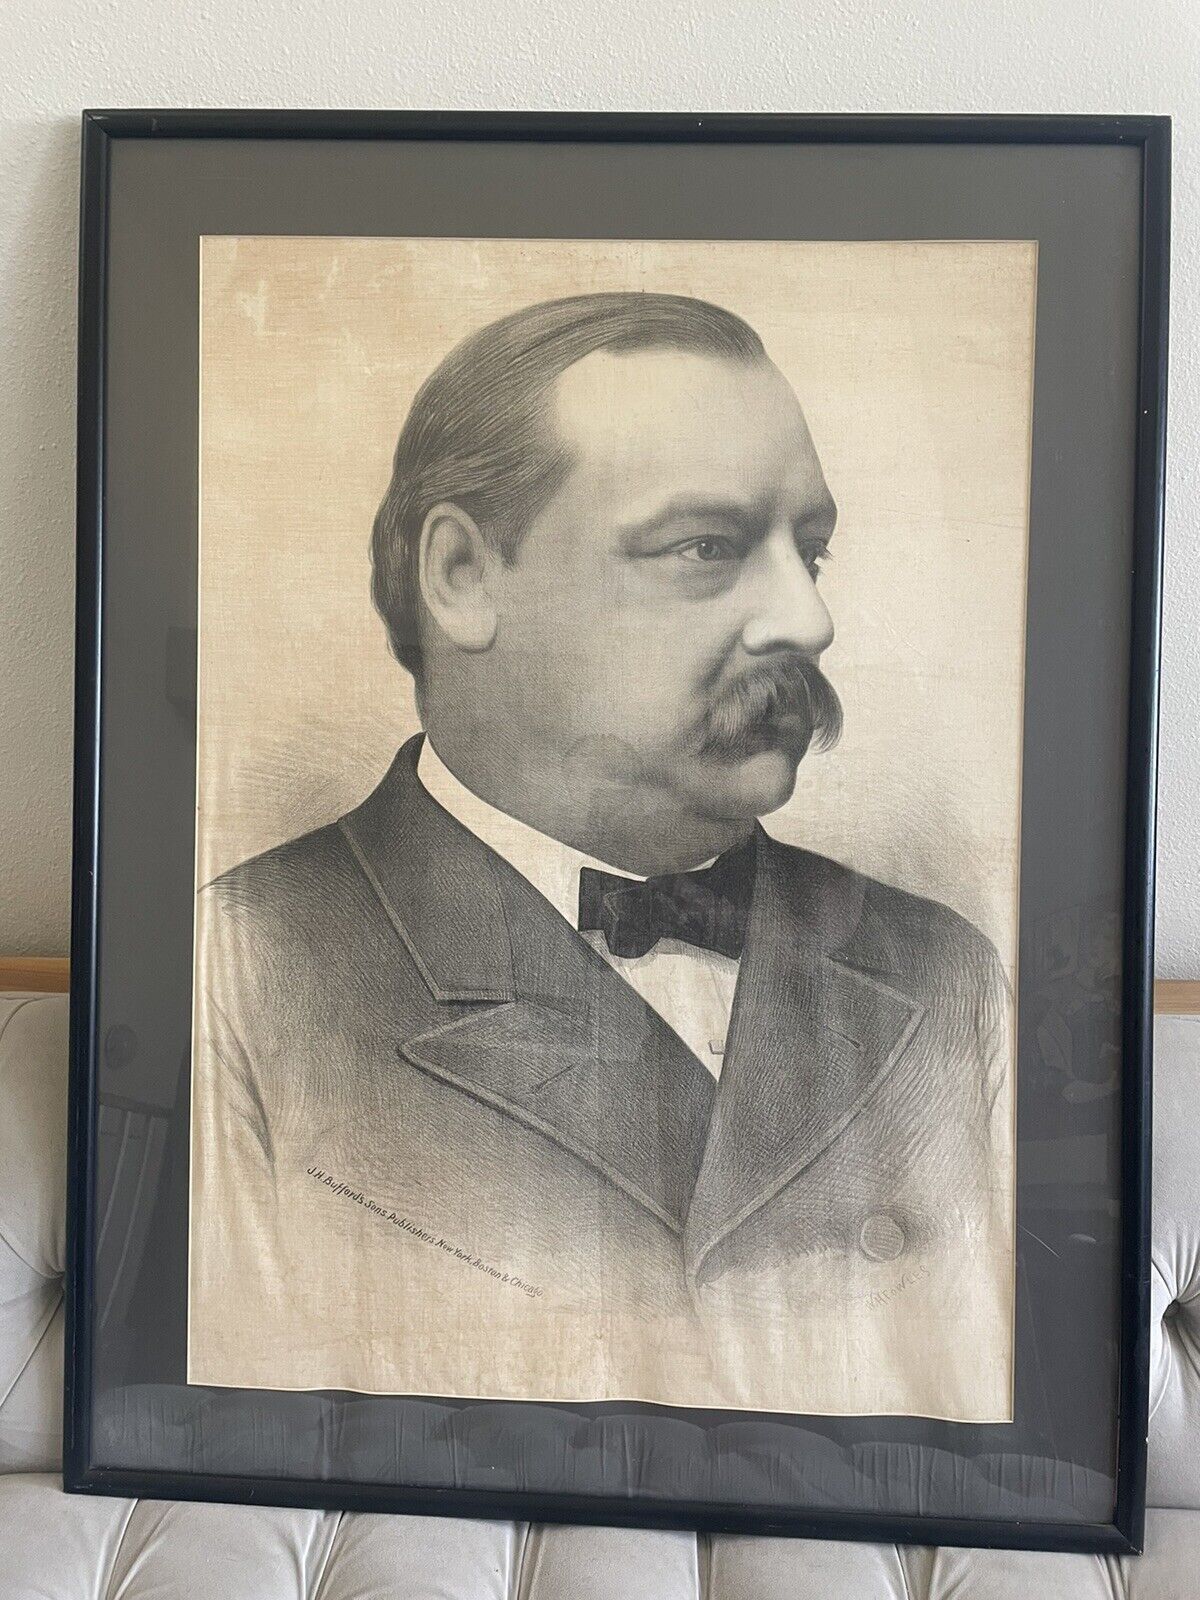 ￼ Extremely￼ Rare  Vintage Large Grover Cleveland portrait on cloth  43”x33”